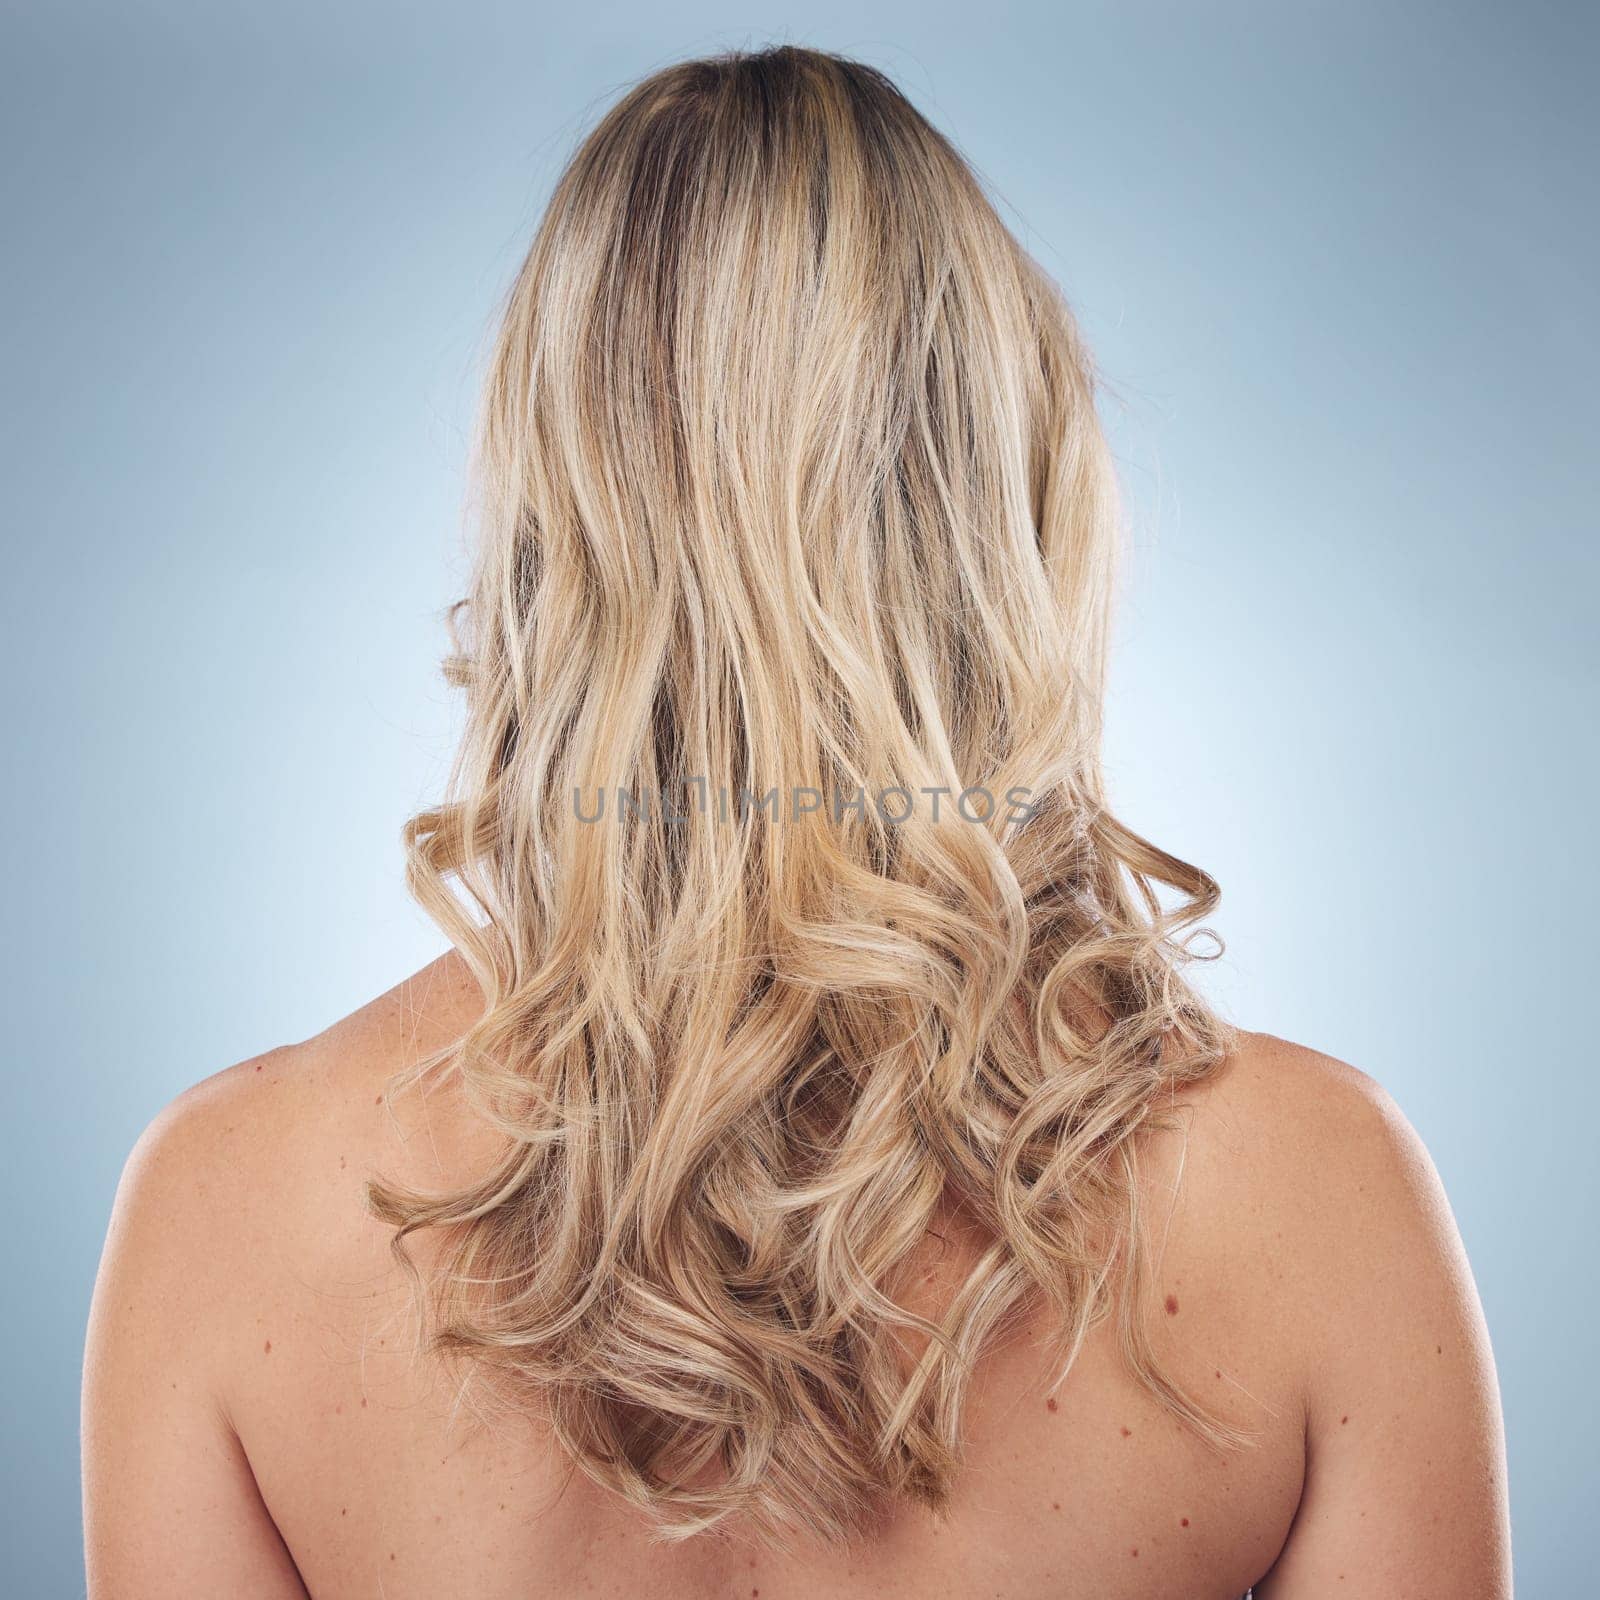 Hair care, back and beauty of woman in studio isolated on a gray background. Keratin, cosmetics and female model with curly hairstyle after salon treatment for growth, texture or blonde balayage